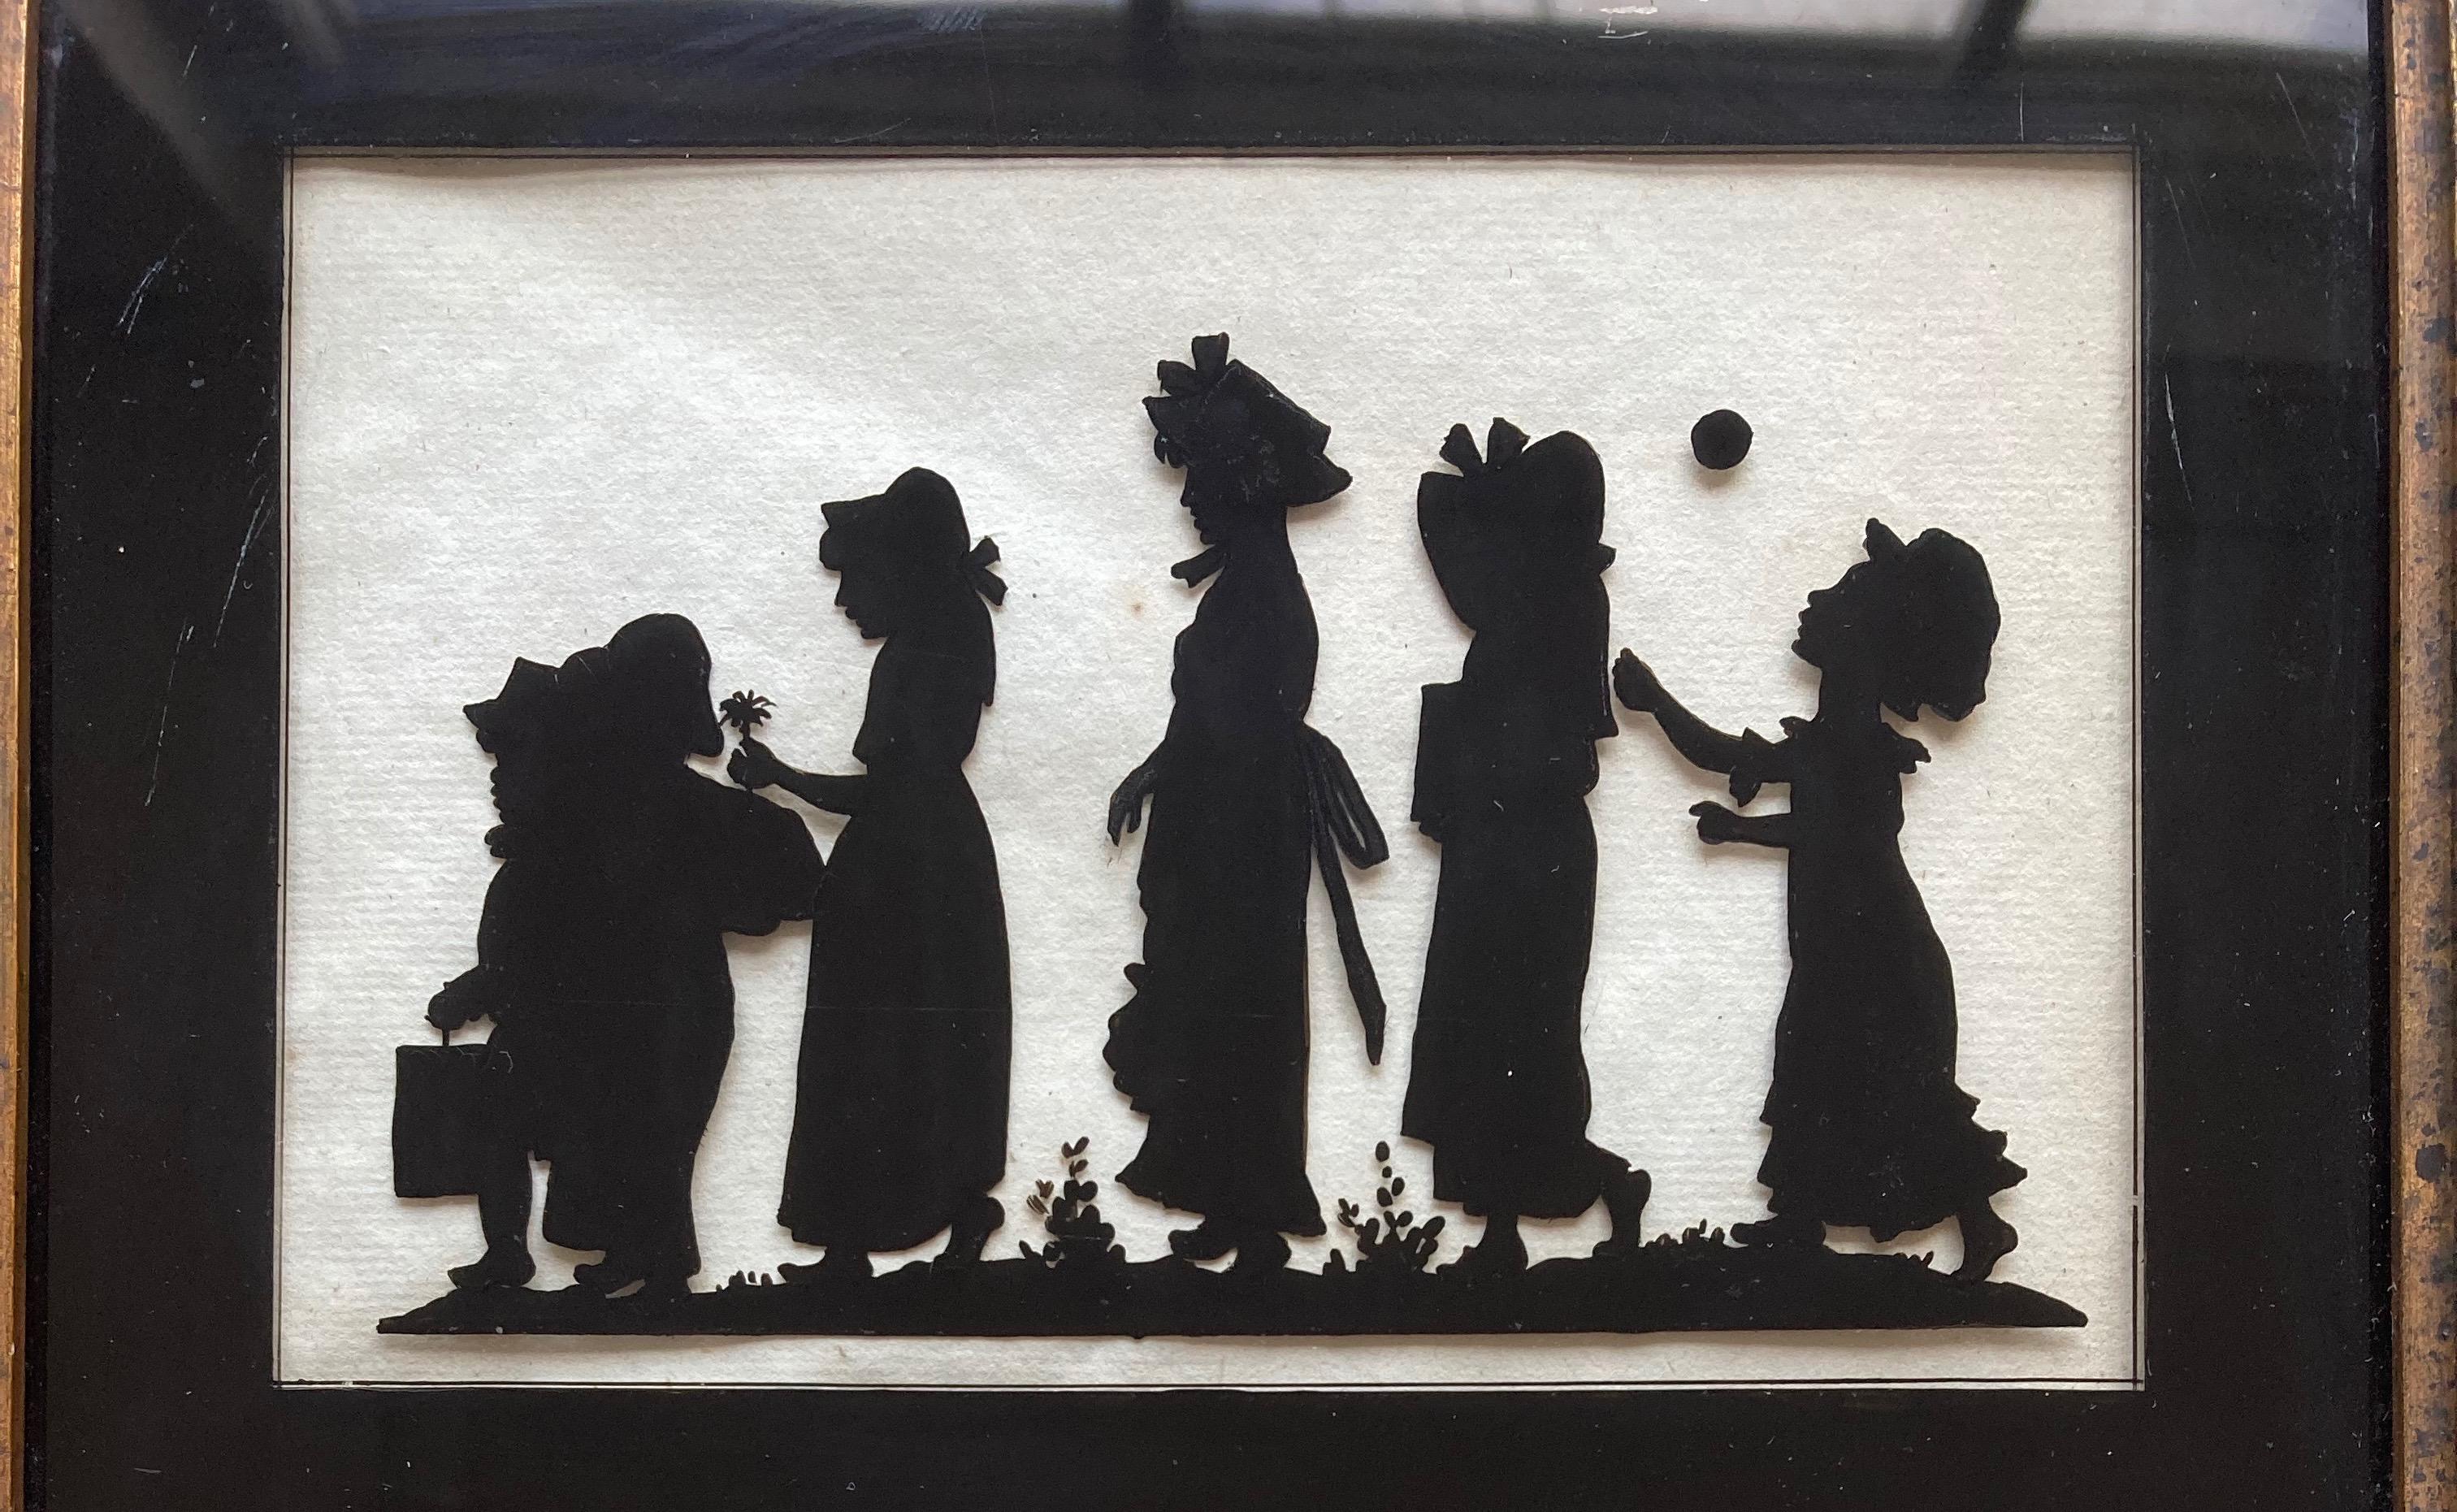 19th Century Antique silhouette of children, reverse painted on glass - Victorian Art by Unknown